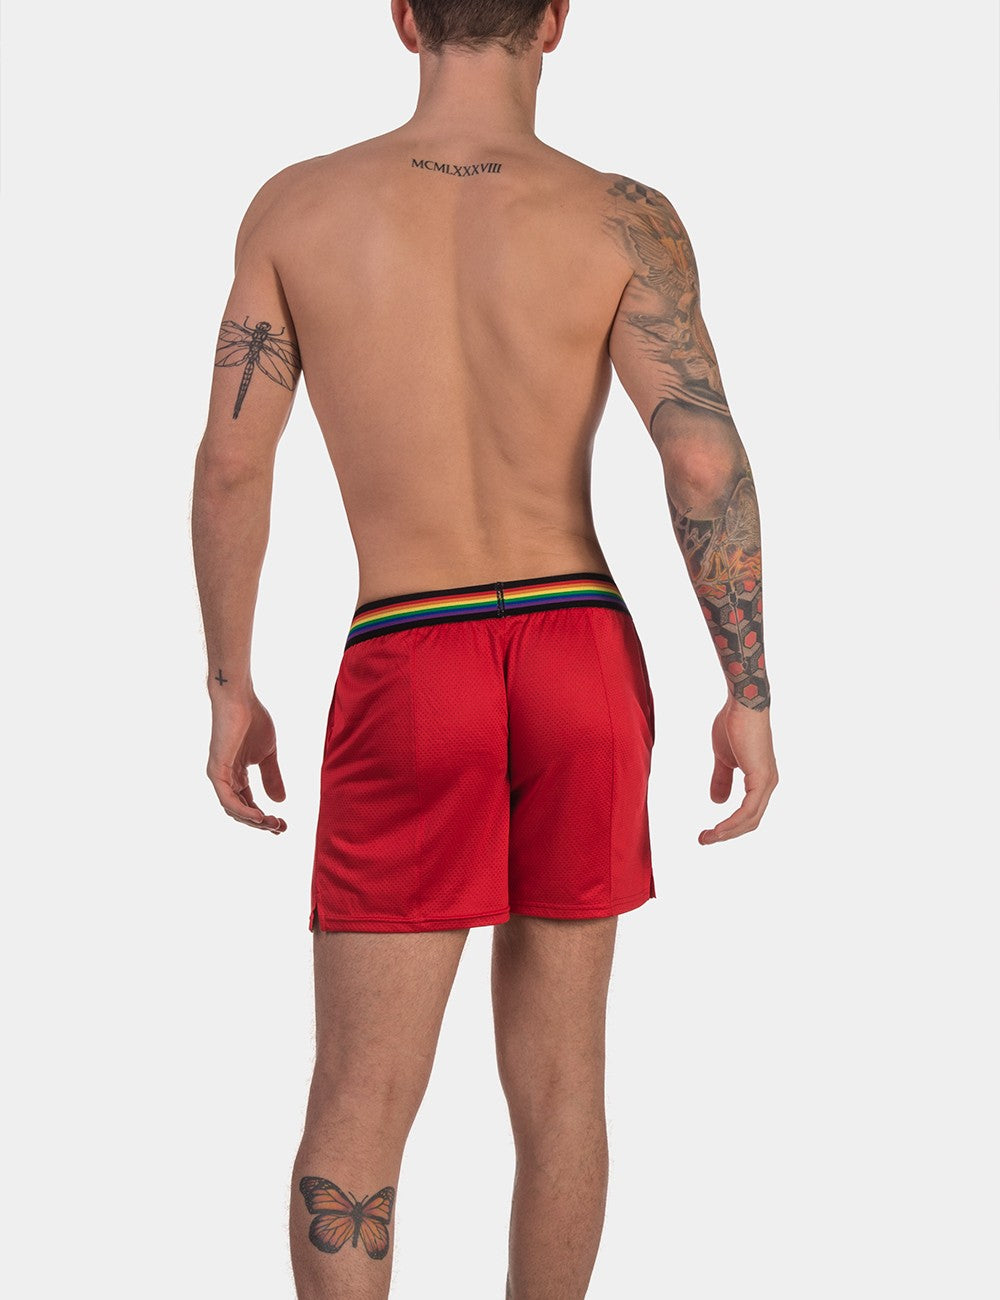 Barcode Berlin Pride Shorts | Red